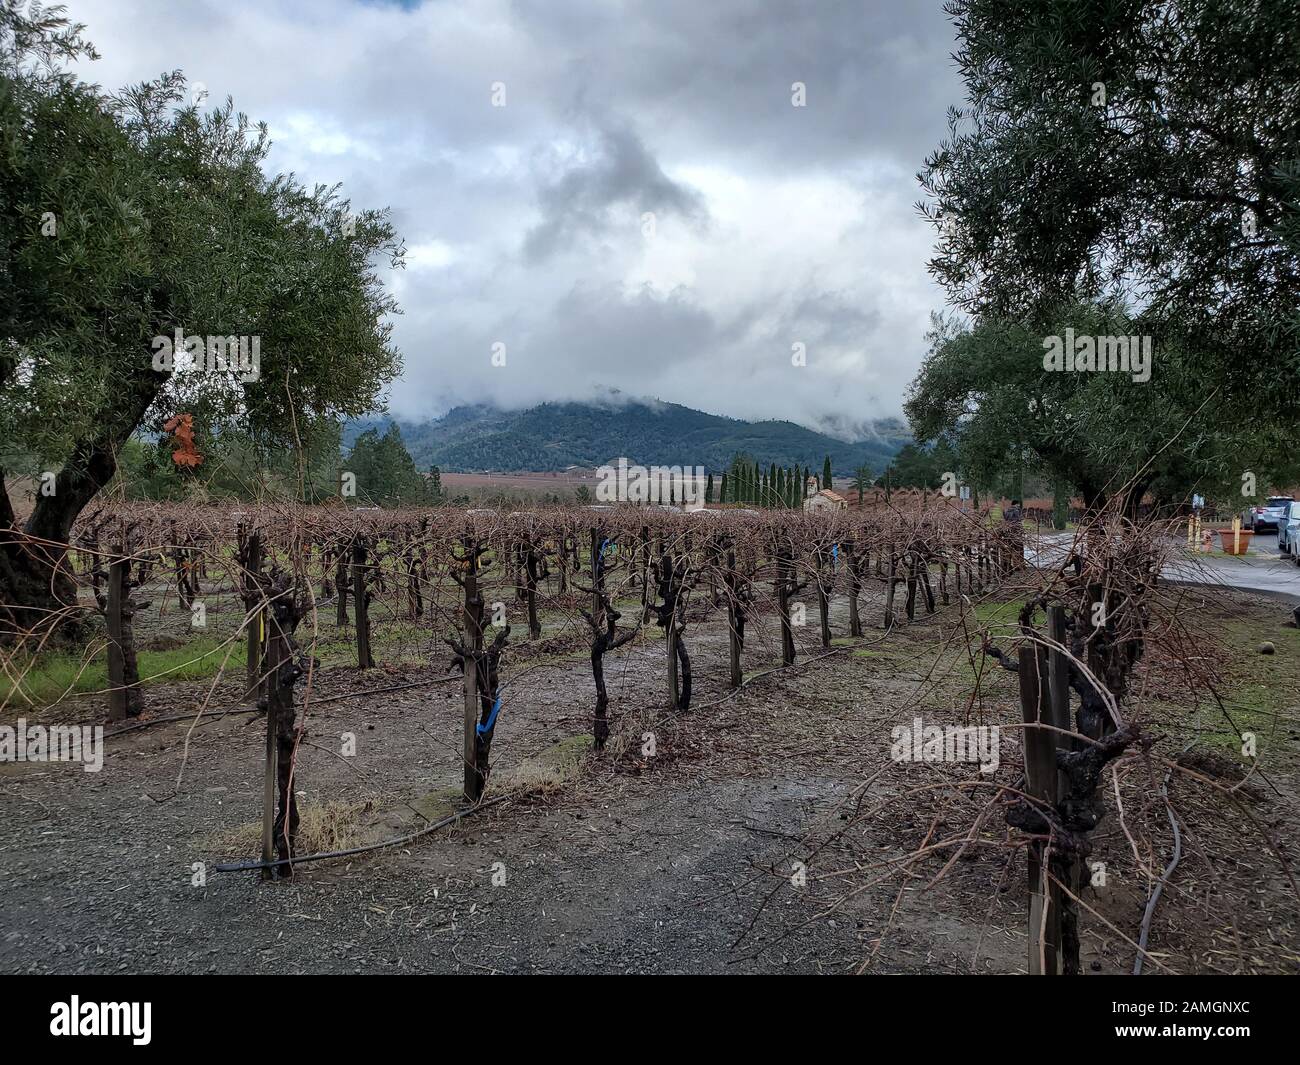 Grapevines at Castello di Amorosa, a vineyard in the Calistoga AVA of the Napa Valley in the California Wine Country, housed in a large reconstruction of a Tuscan castle, Calistoga, California, December 22, 2019. Castello di Amorosa is a popular tourist destination for visitors to the Napa Valley. () Stock Photo